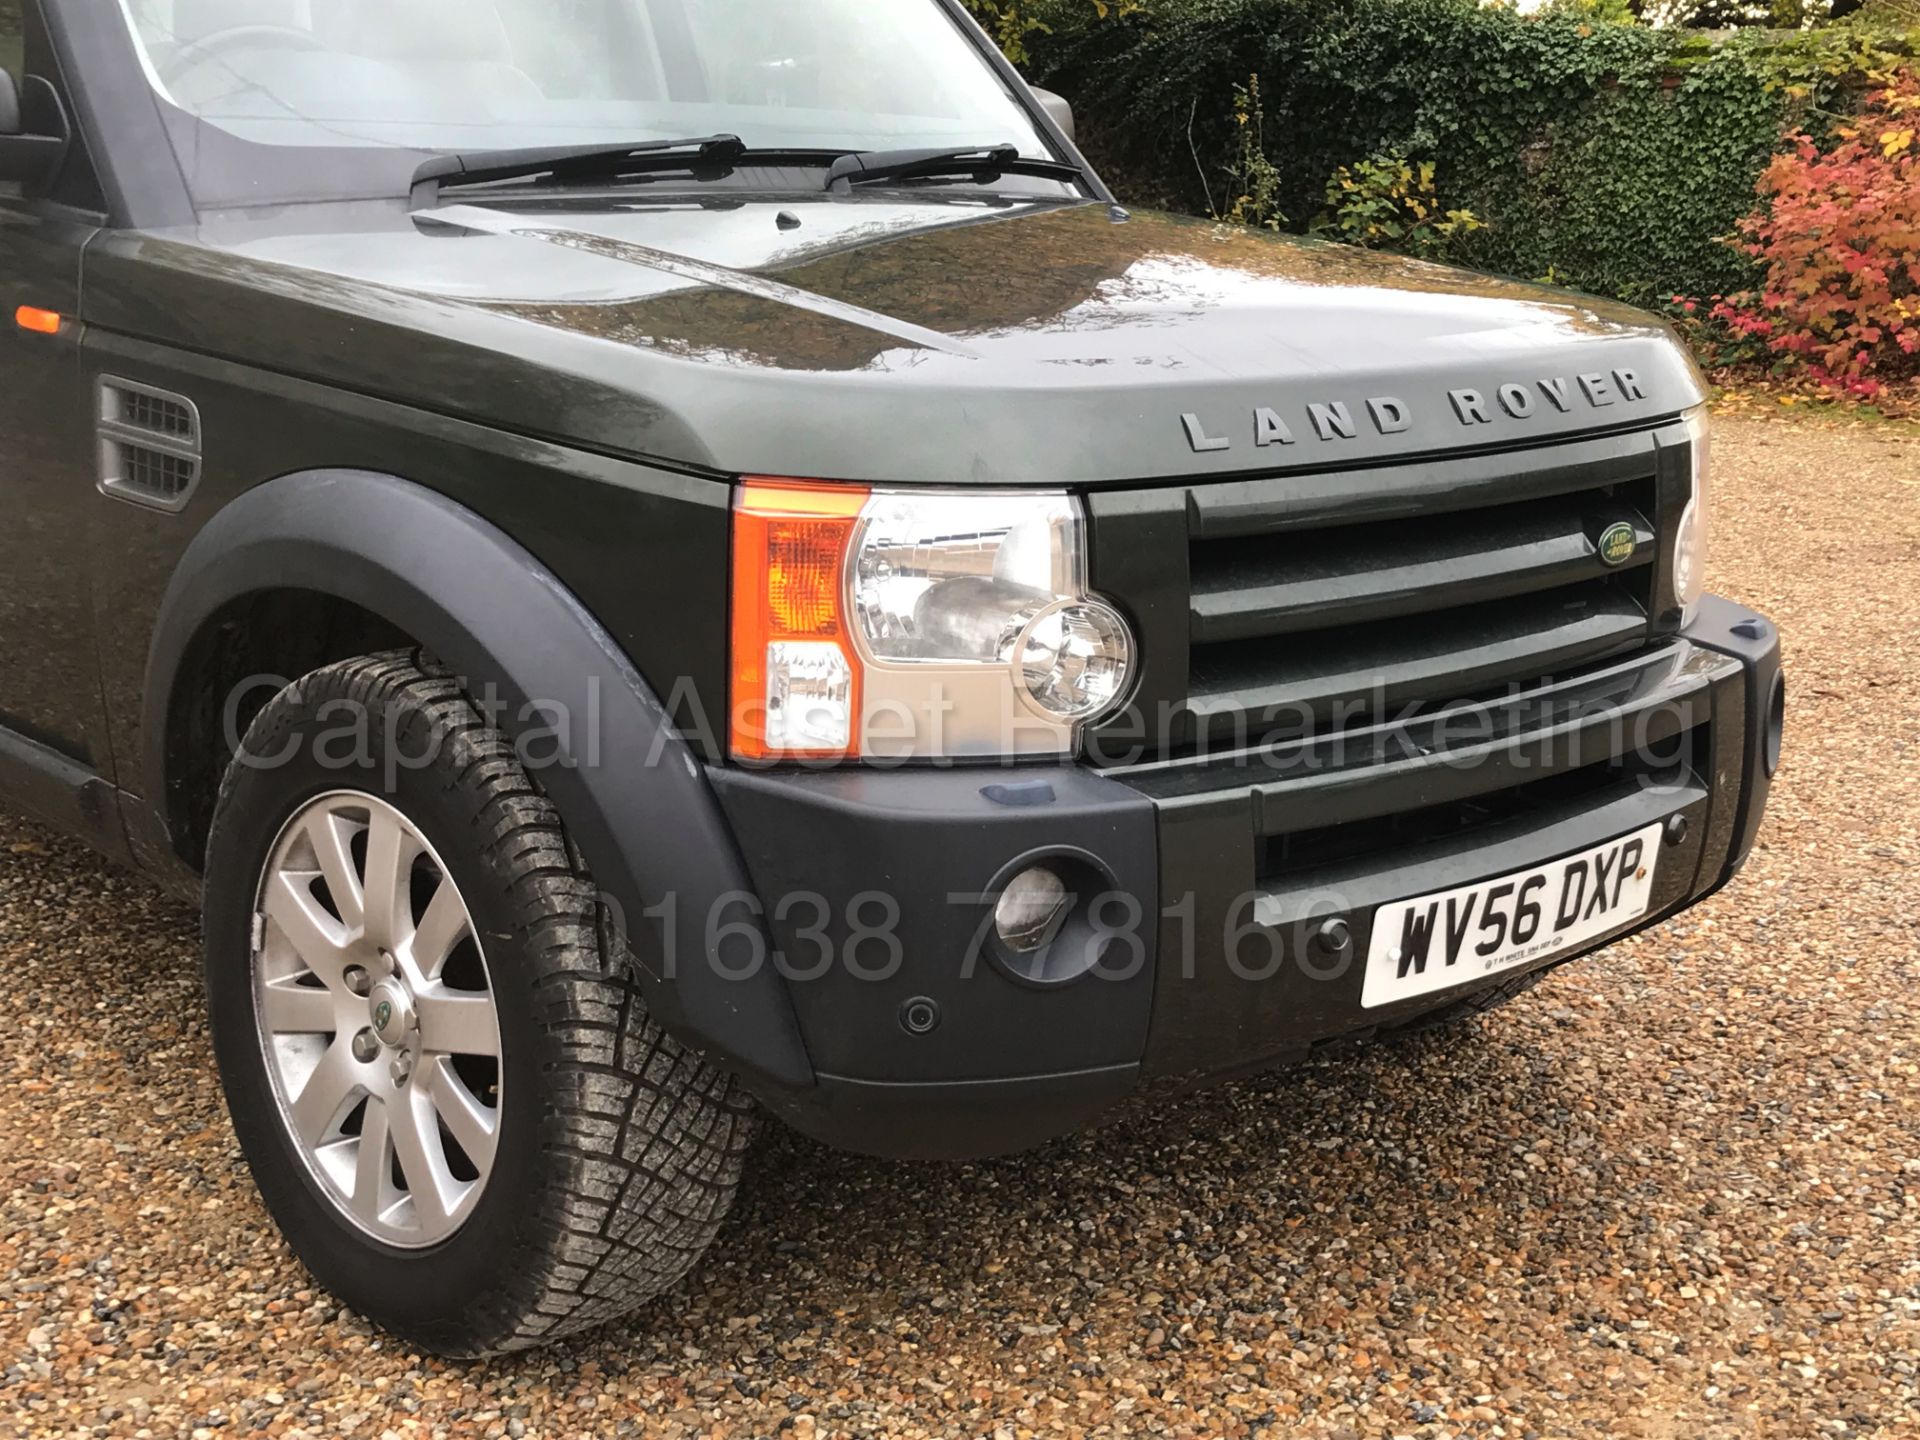 LAND ROVER DISCOVERY 3 SE (2007 MODEL) 'TDV6 - AUTO - LEATHER - SAT NAV - 7 SEATER' *MASSIVE SPEC* - Image 11 of 36